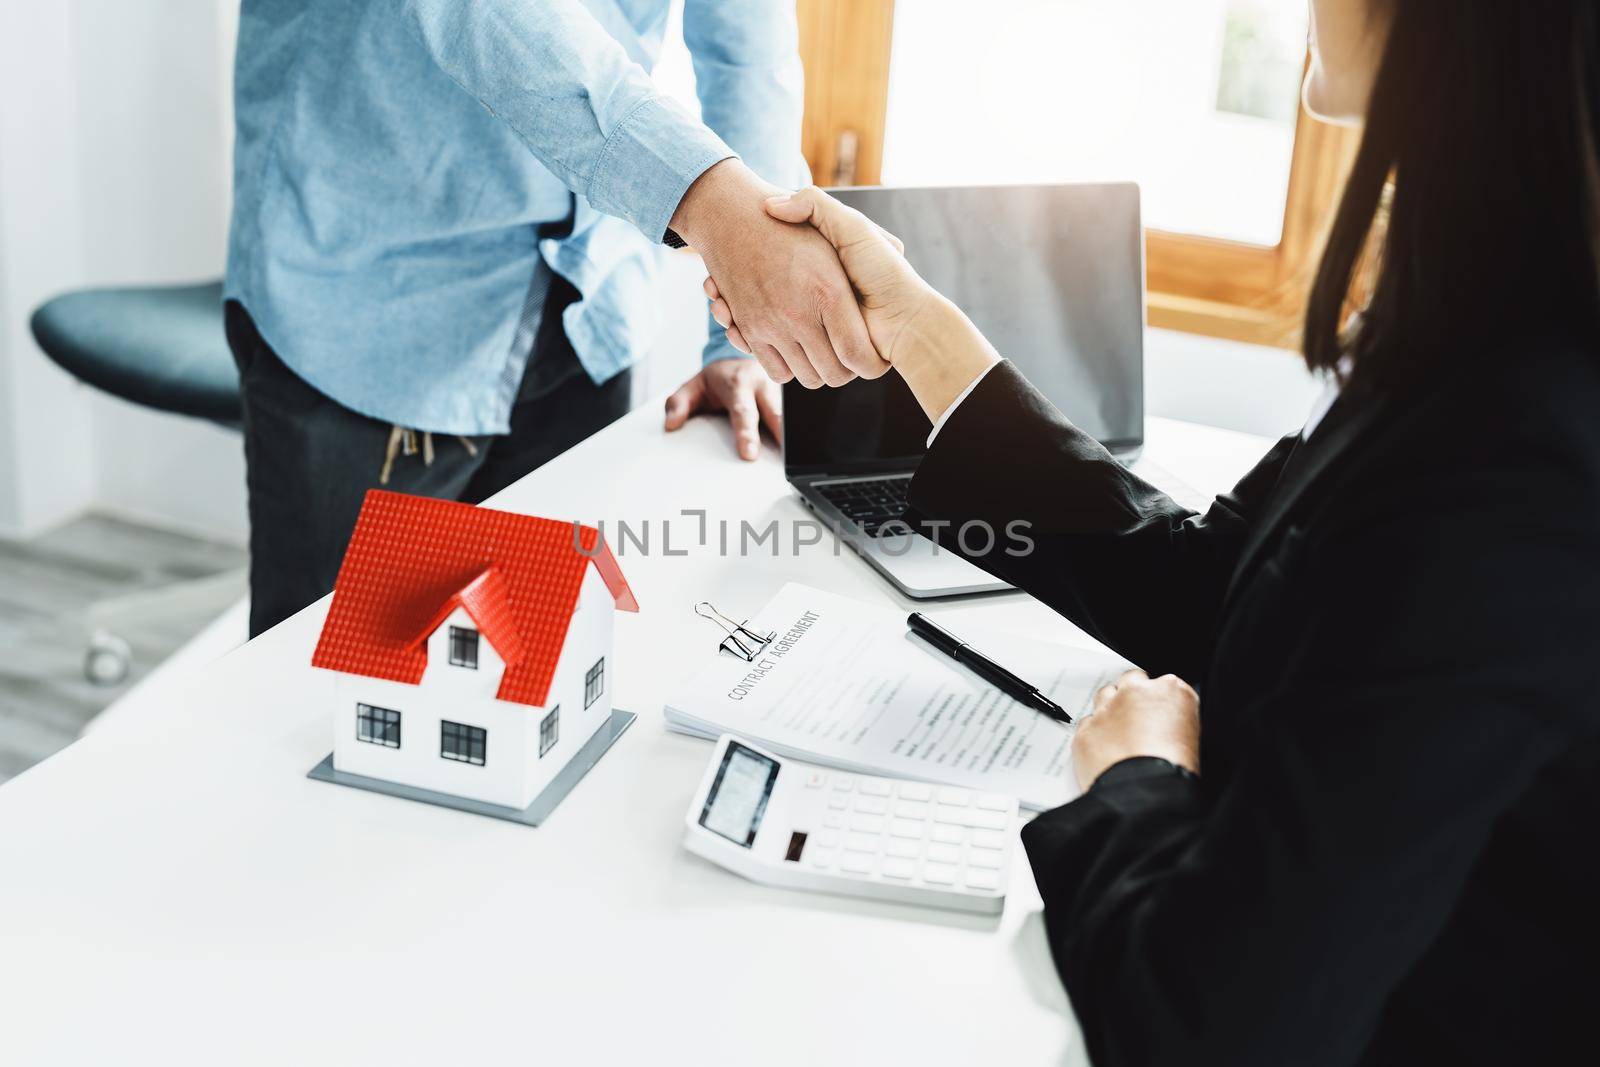 Laws, contracts, mortgages, clients join hands with real estate agents congratulating real estate agents on home and land purchase agreements with insurance to reduce risks during home installments by Manastrong